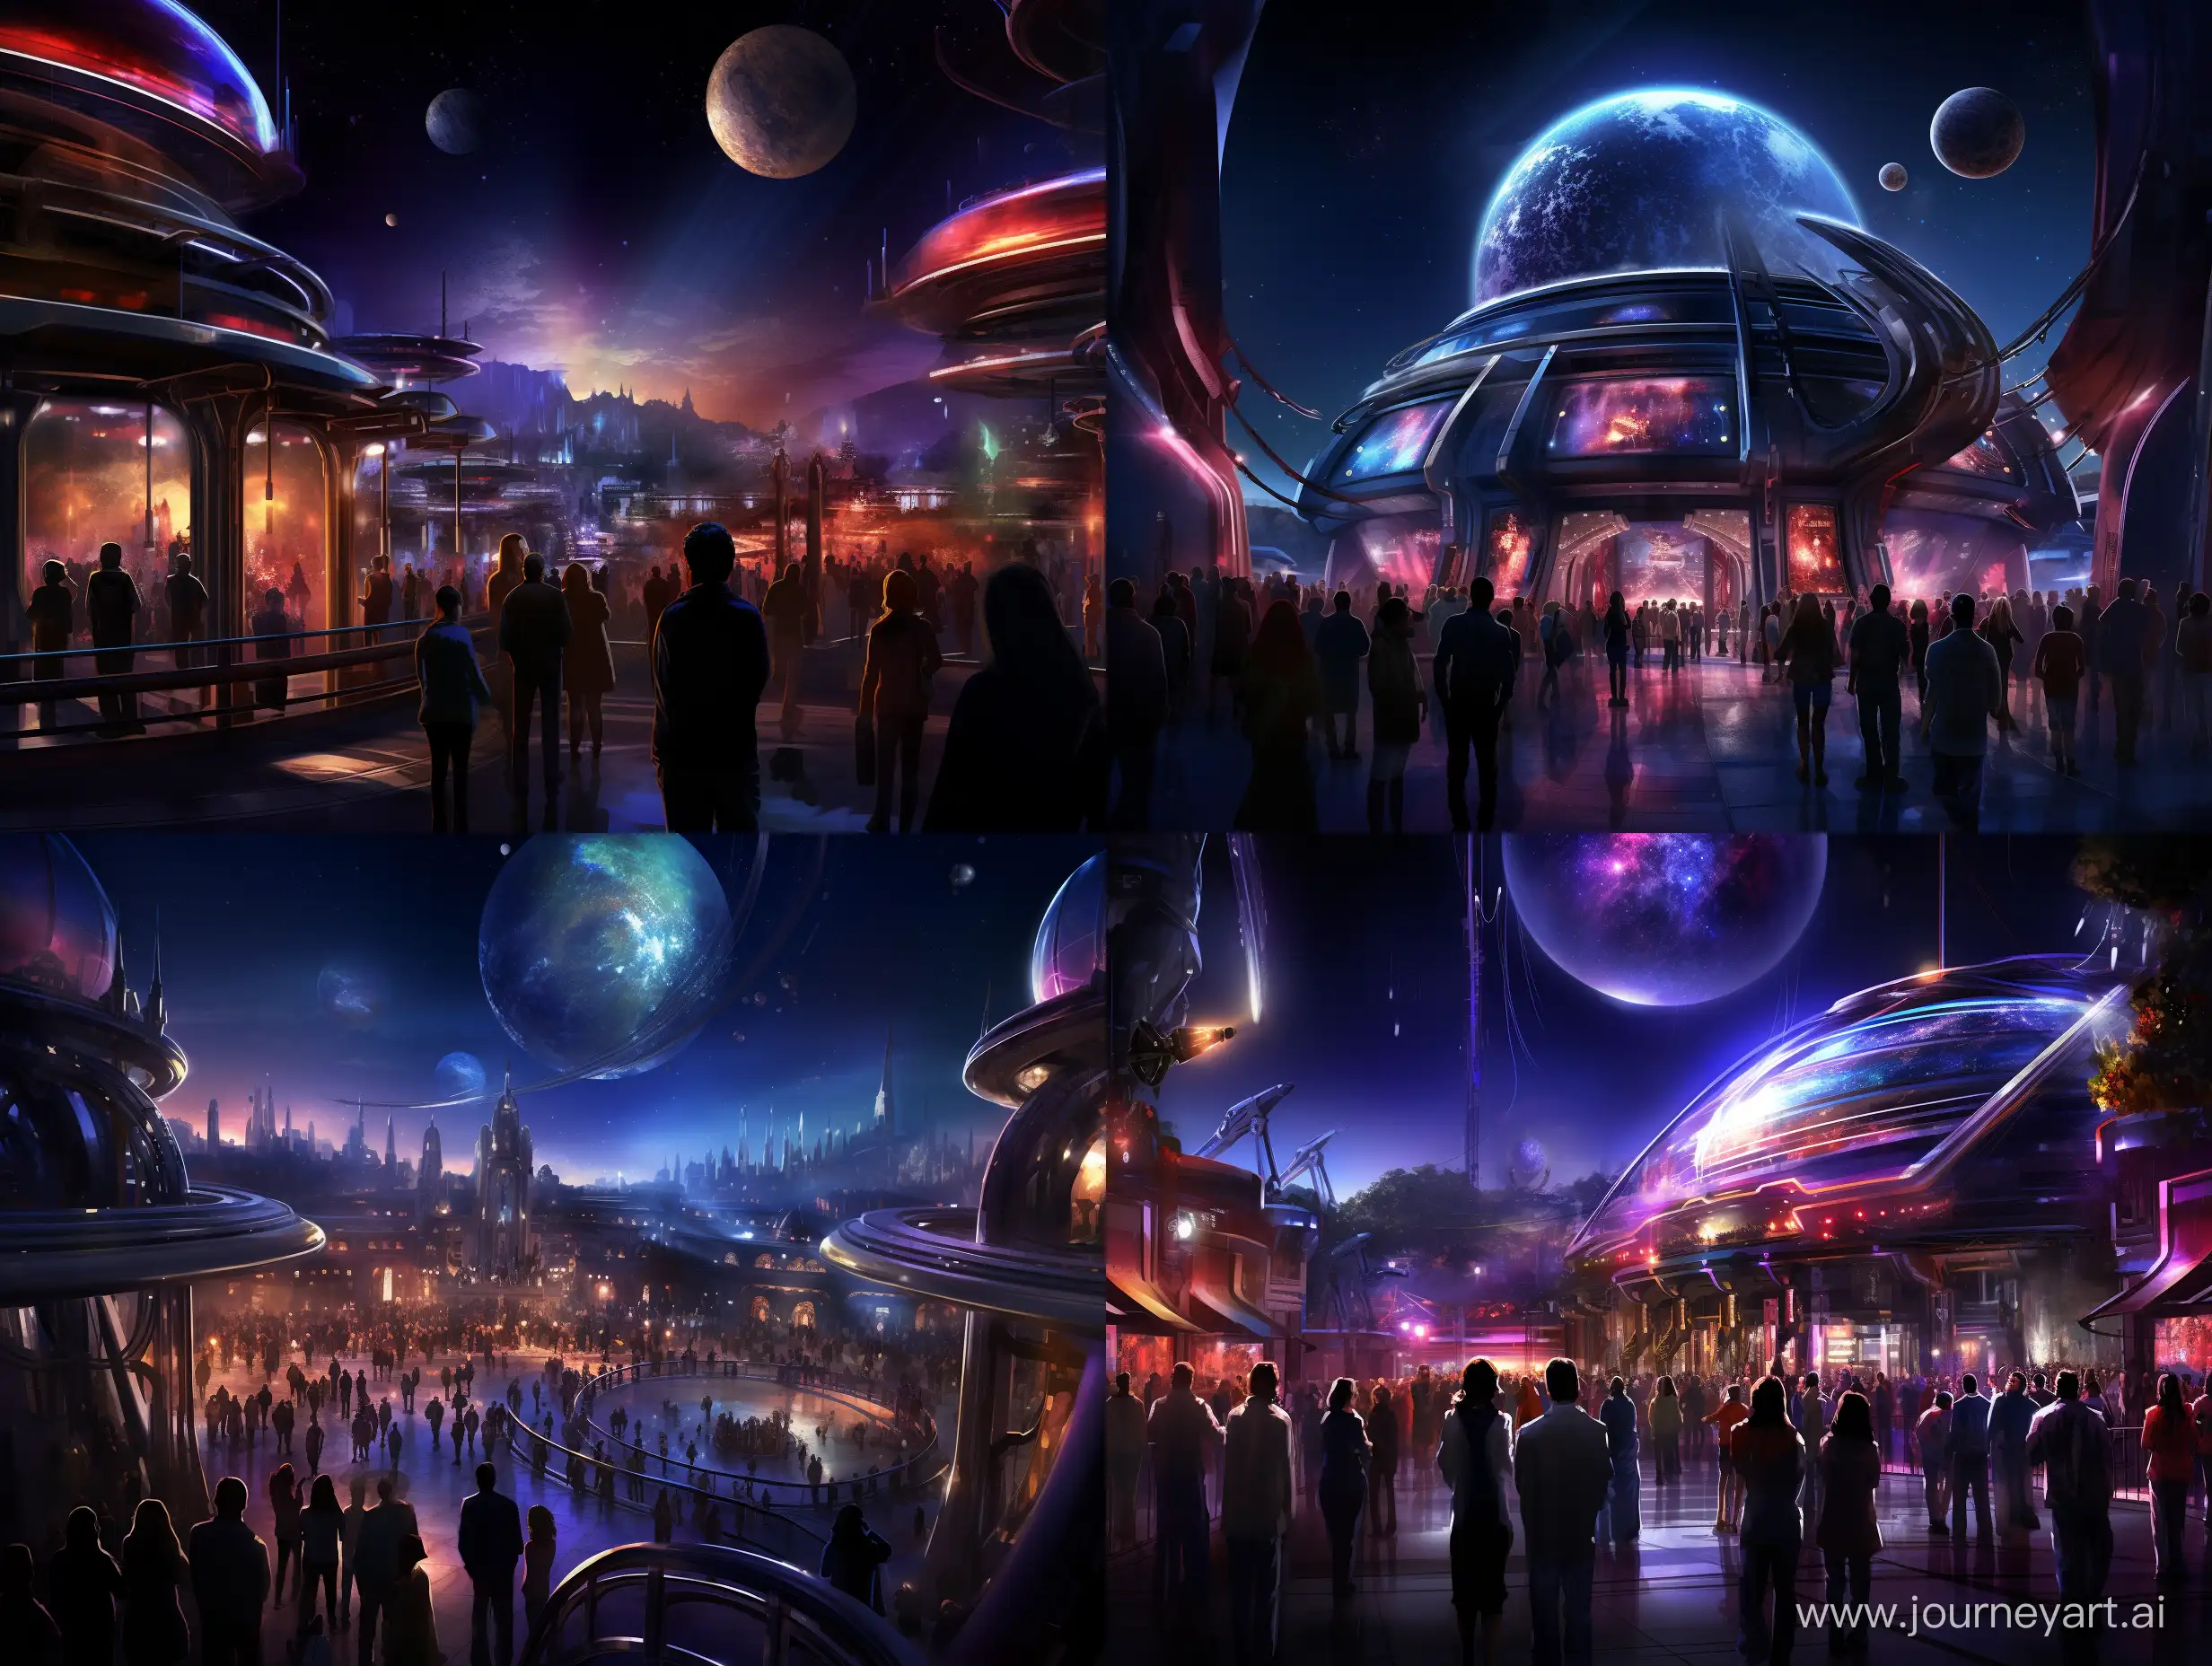 Enchanting-Night-at-Small-Tomorrowland-Space-Expo-and-Doctor-Who-Center-in-Disney-Parks